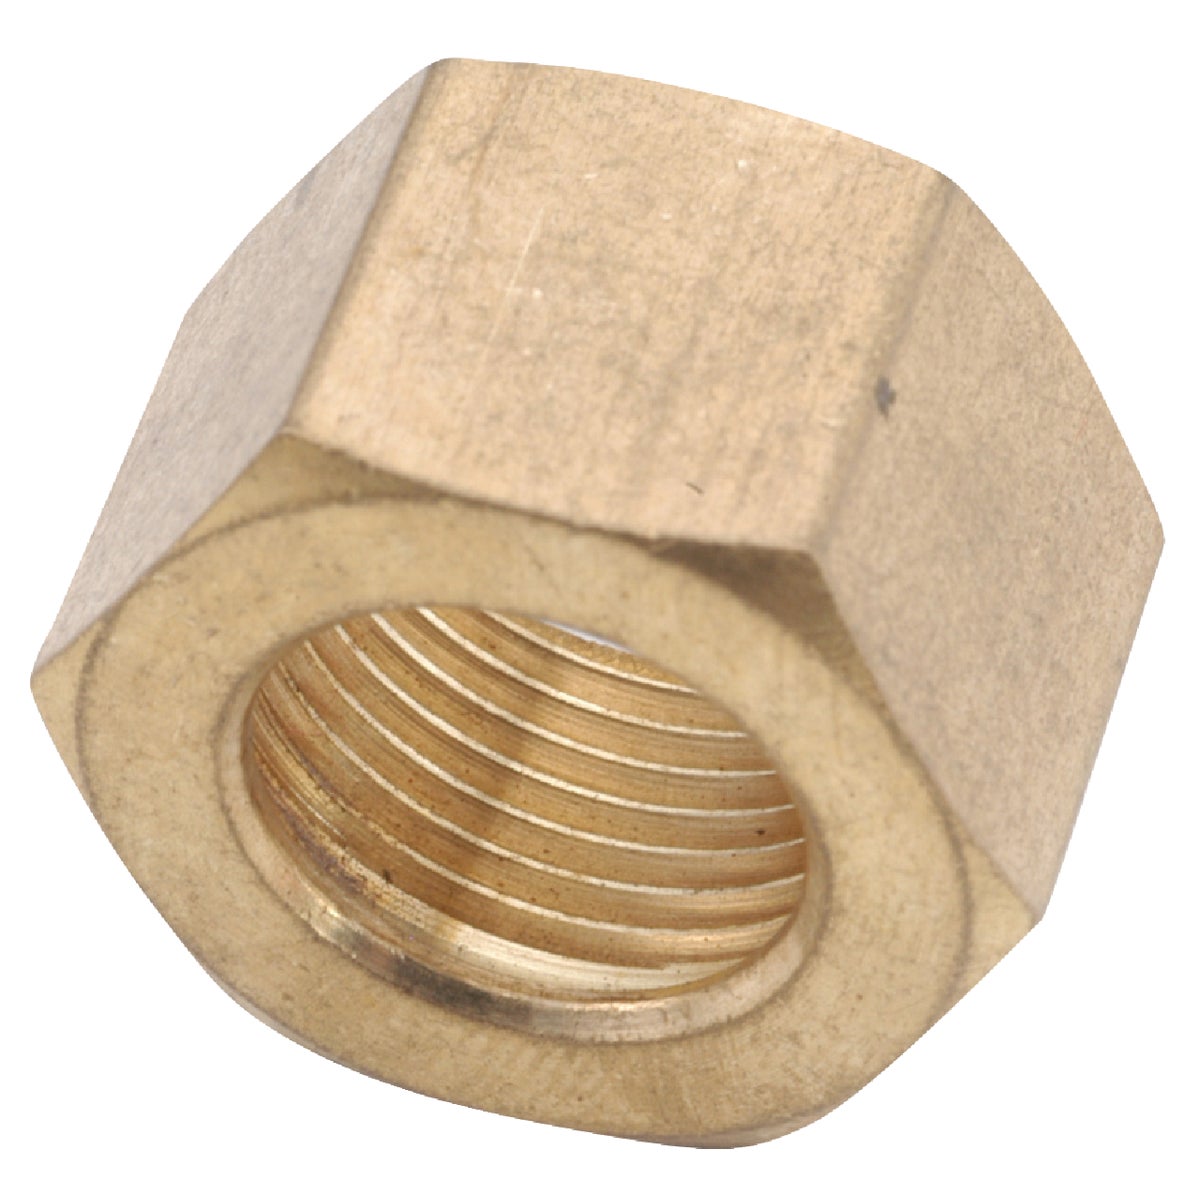 Anderson Metals 3/16 In. Brass Compression Nut (3-Pack)